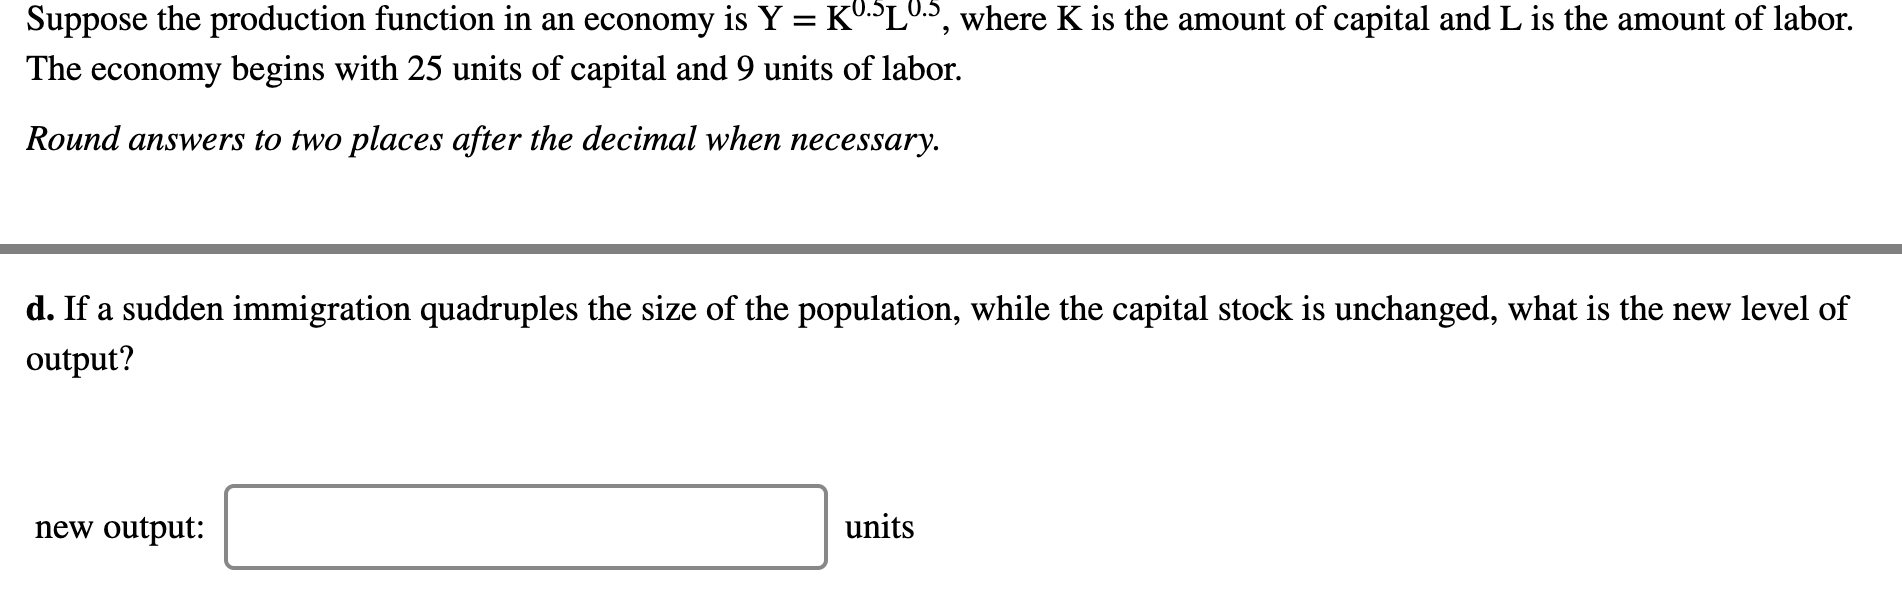 Suppose the production function in an economy is Y = KULOS, where K is the amount of capital and L is the amount of labor.
The economy begins with 25 units of capital and 9 units of labor.
Round answers to two places after the decimal when necessary.
d. If a sudden immigration quadruples the size of the population, while the capital stock is unchanged, what is the new level of
output?
new output:
units
